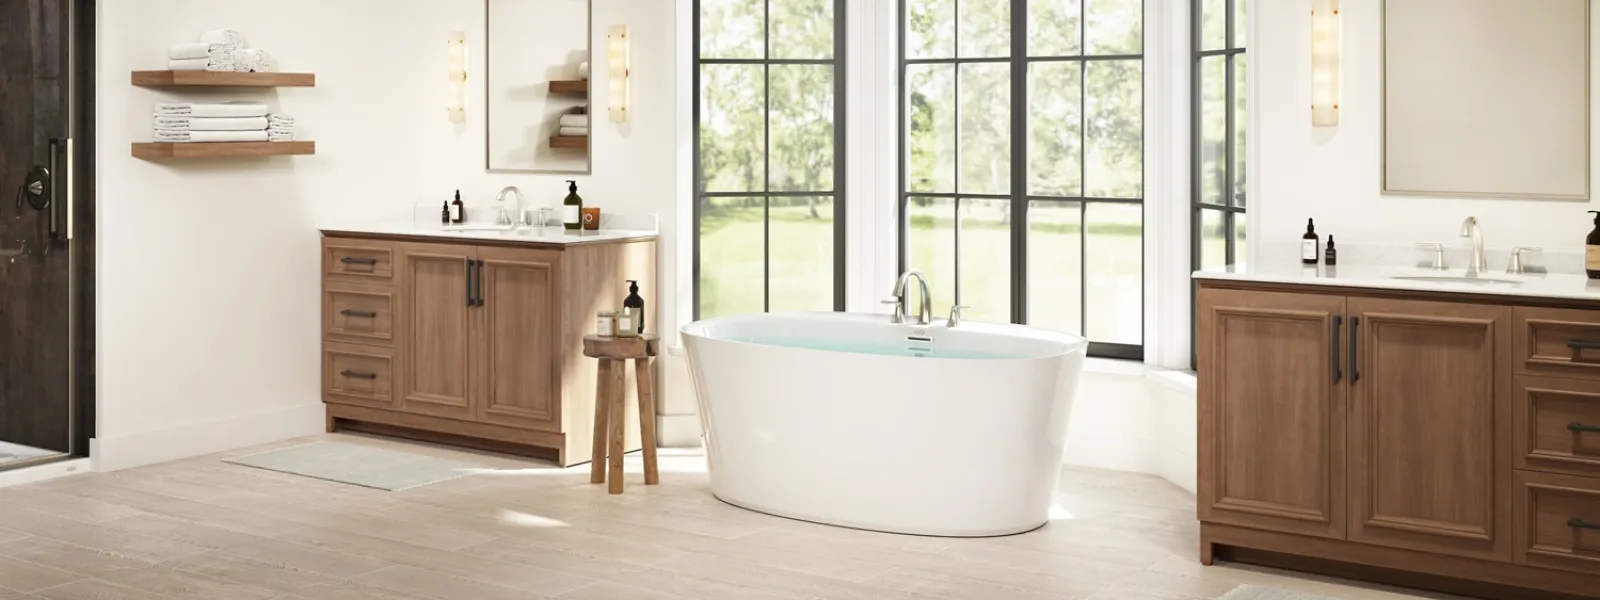 5 Types of Baths to Consider